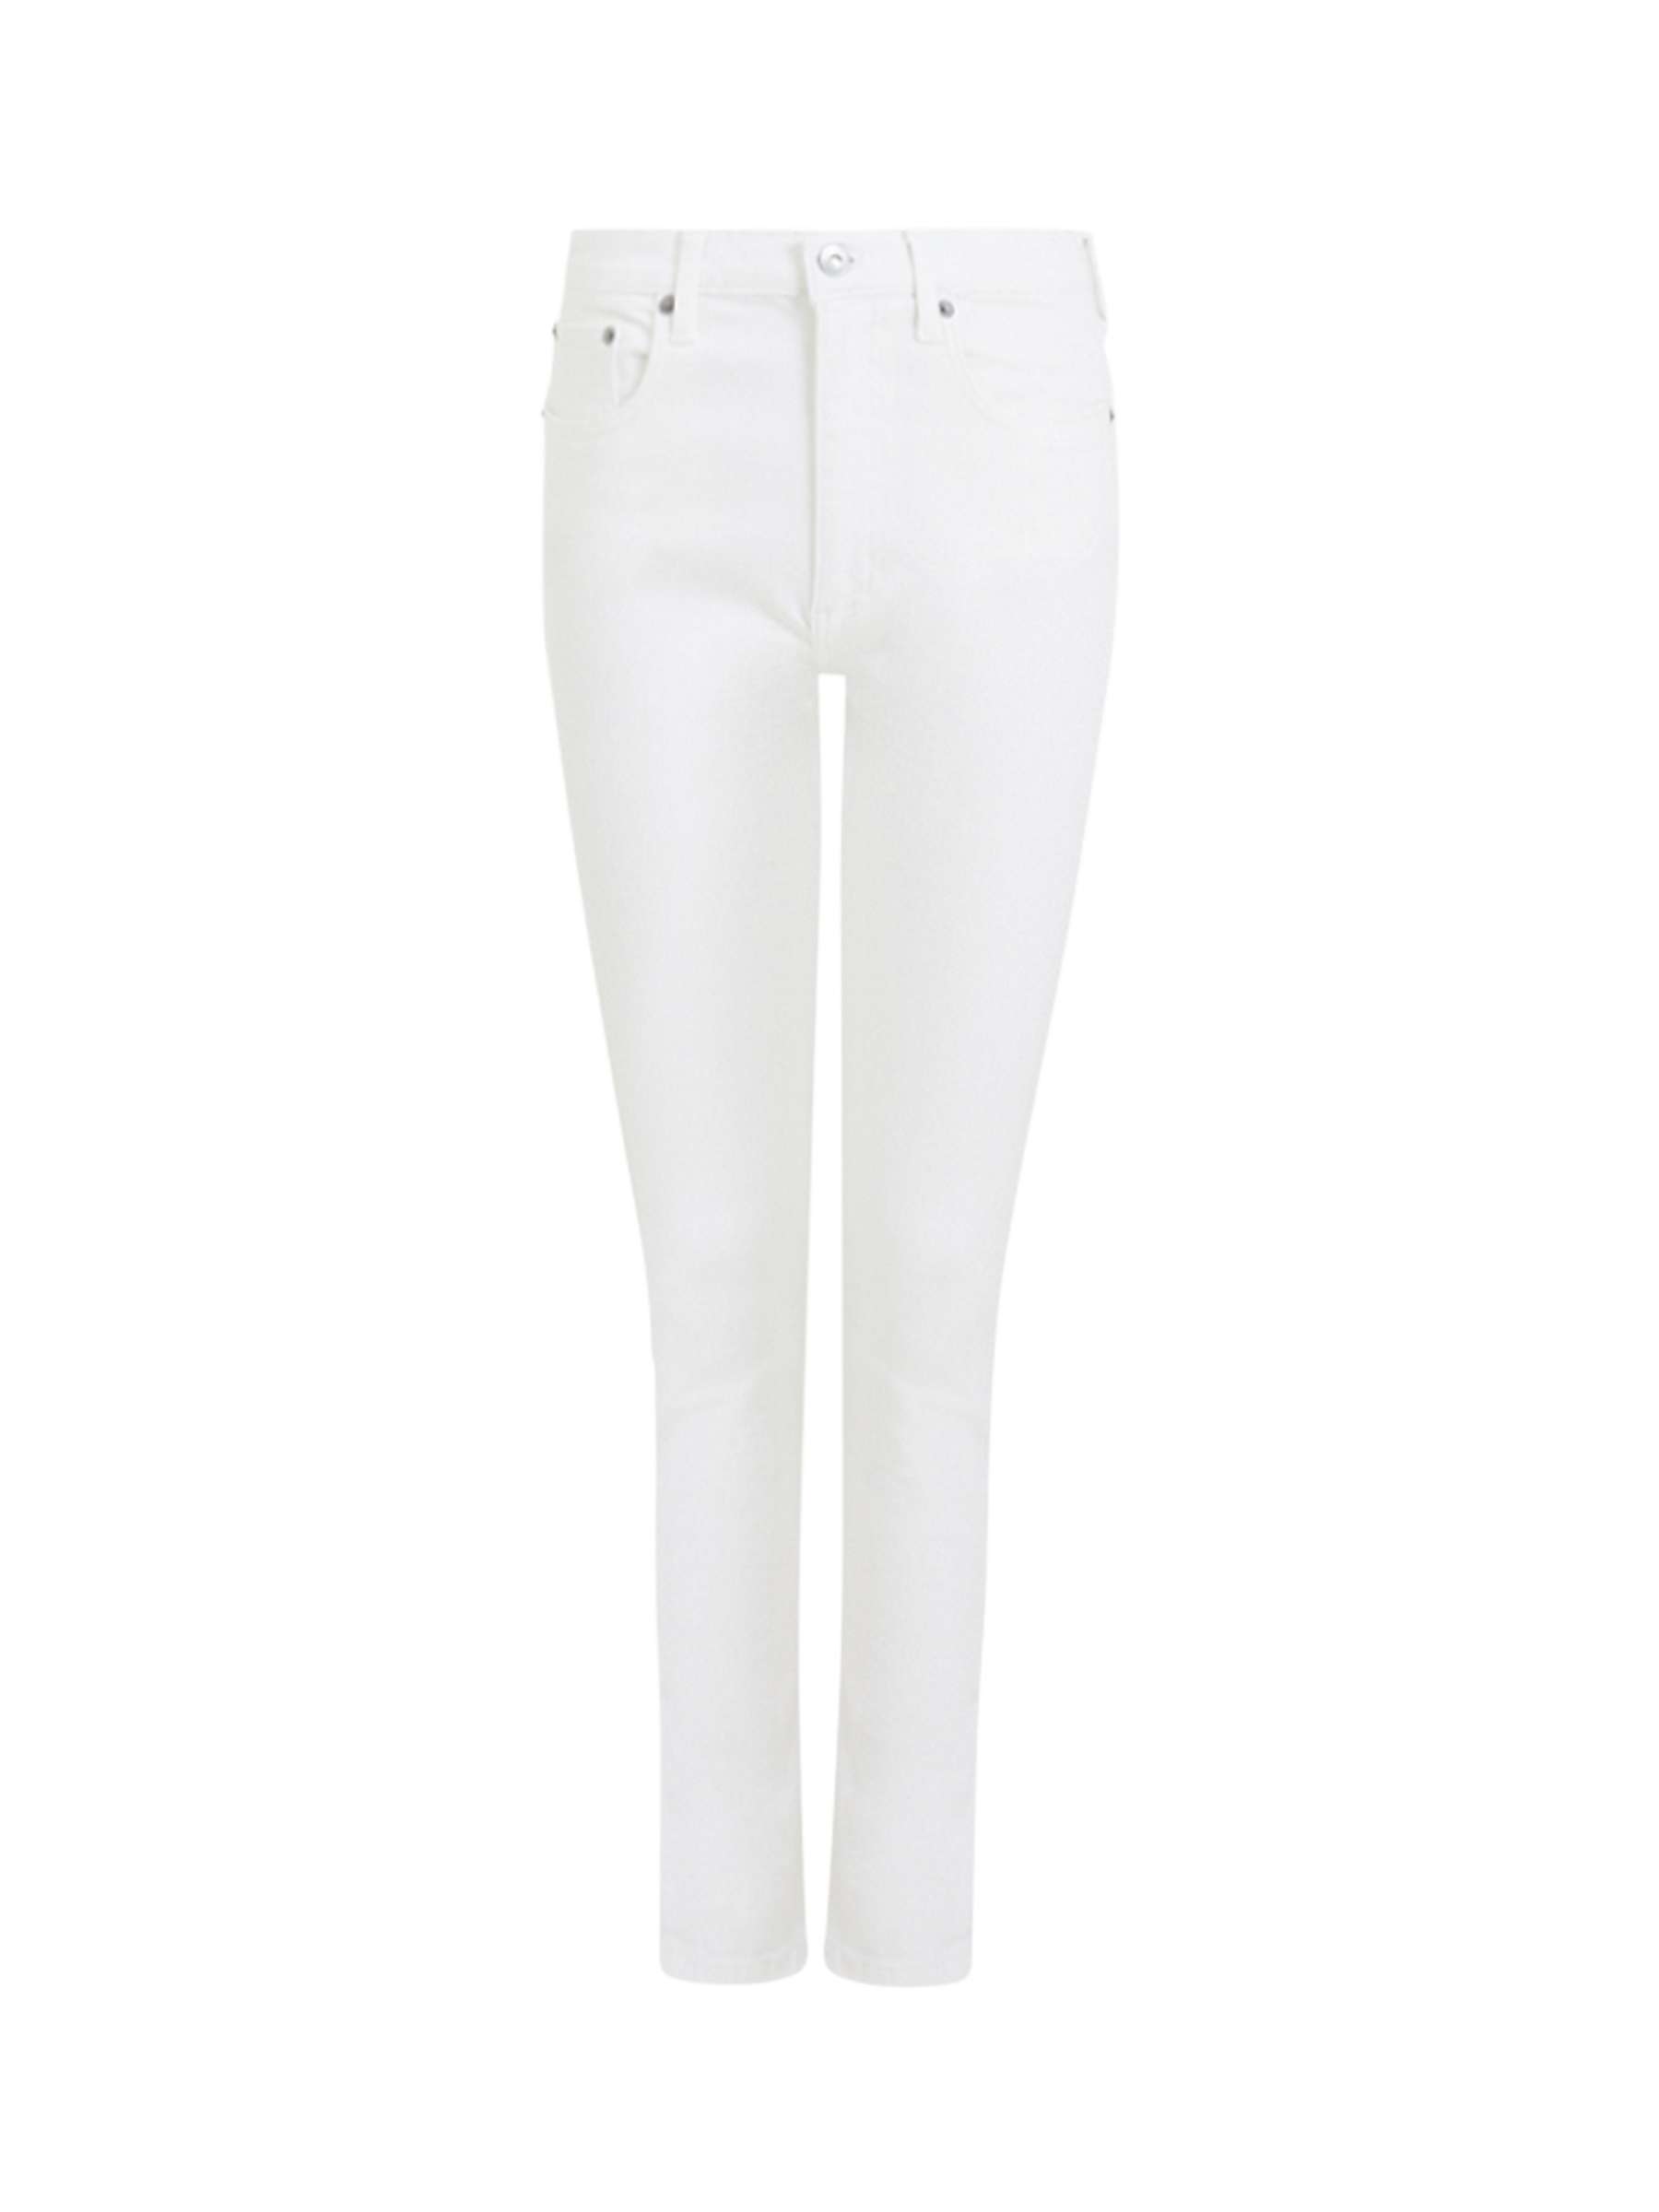 Buy French Connection Rebound Skinny Jeans Online at johnlewis.com